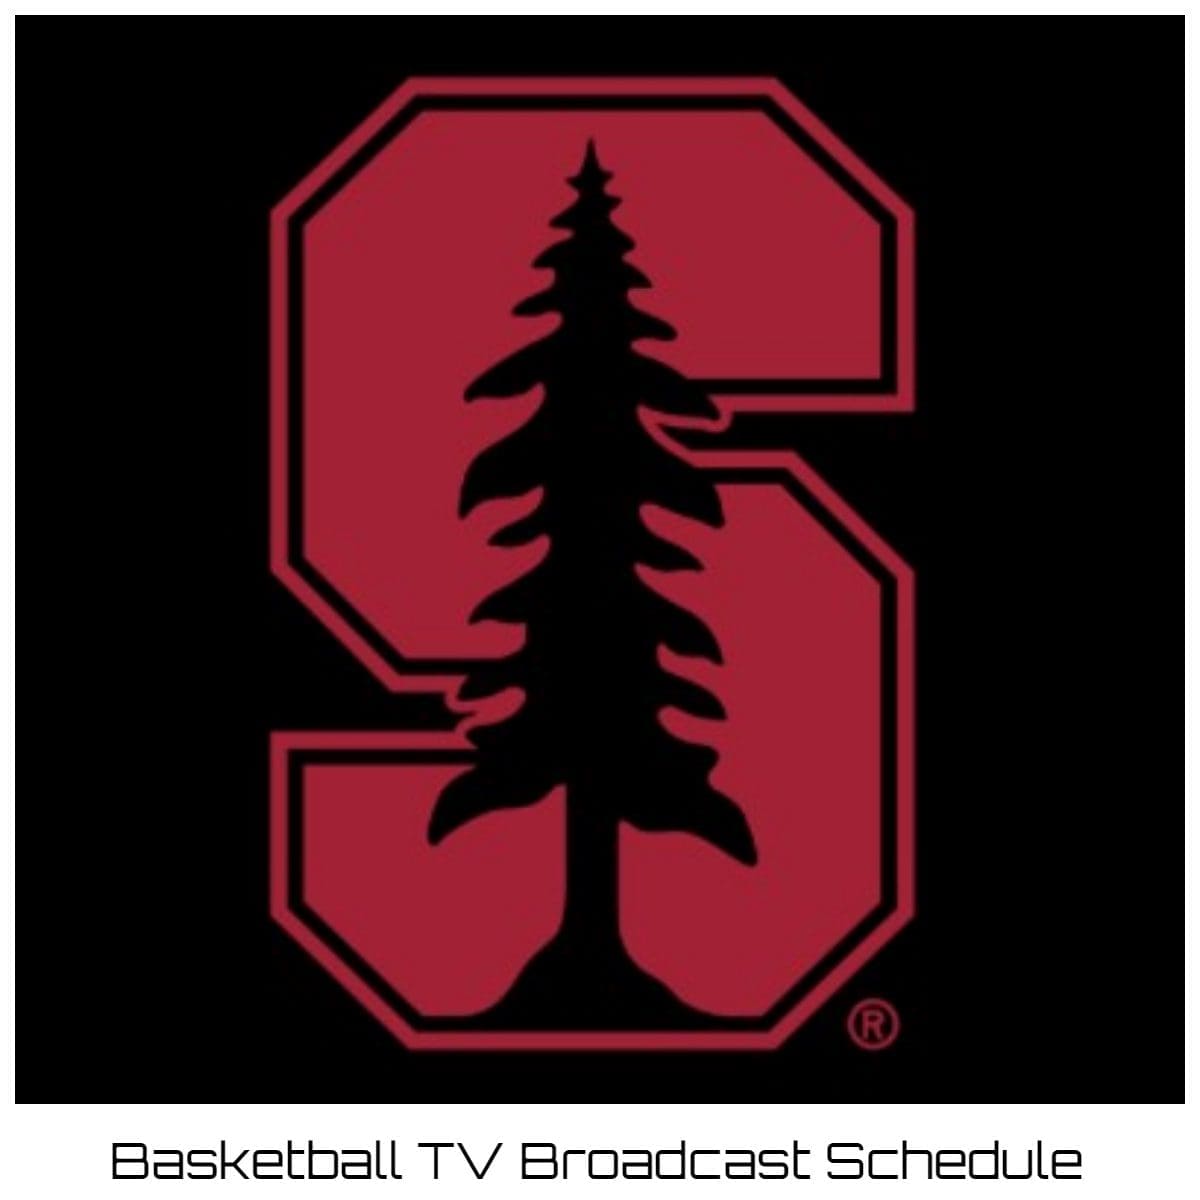 Stanford Cardinal Basketball TV Broadcast Schedule